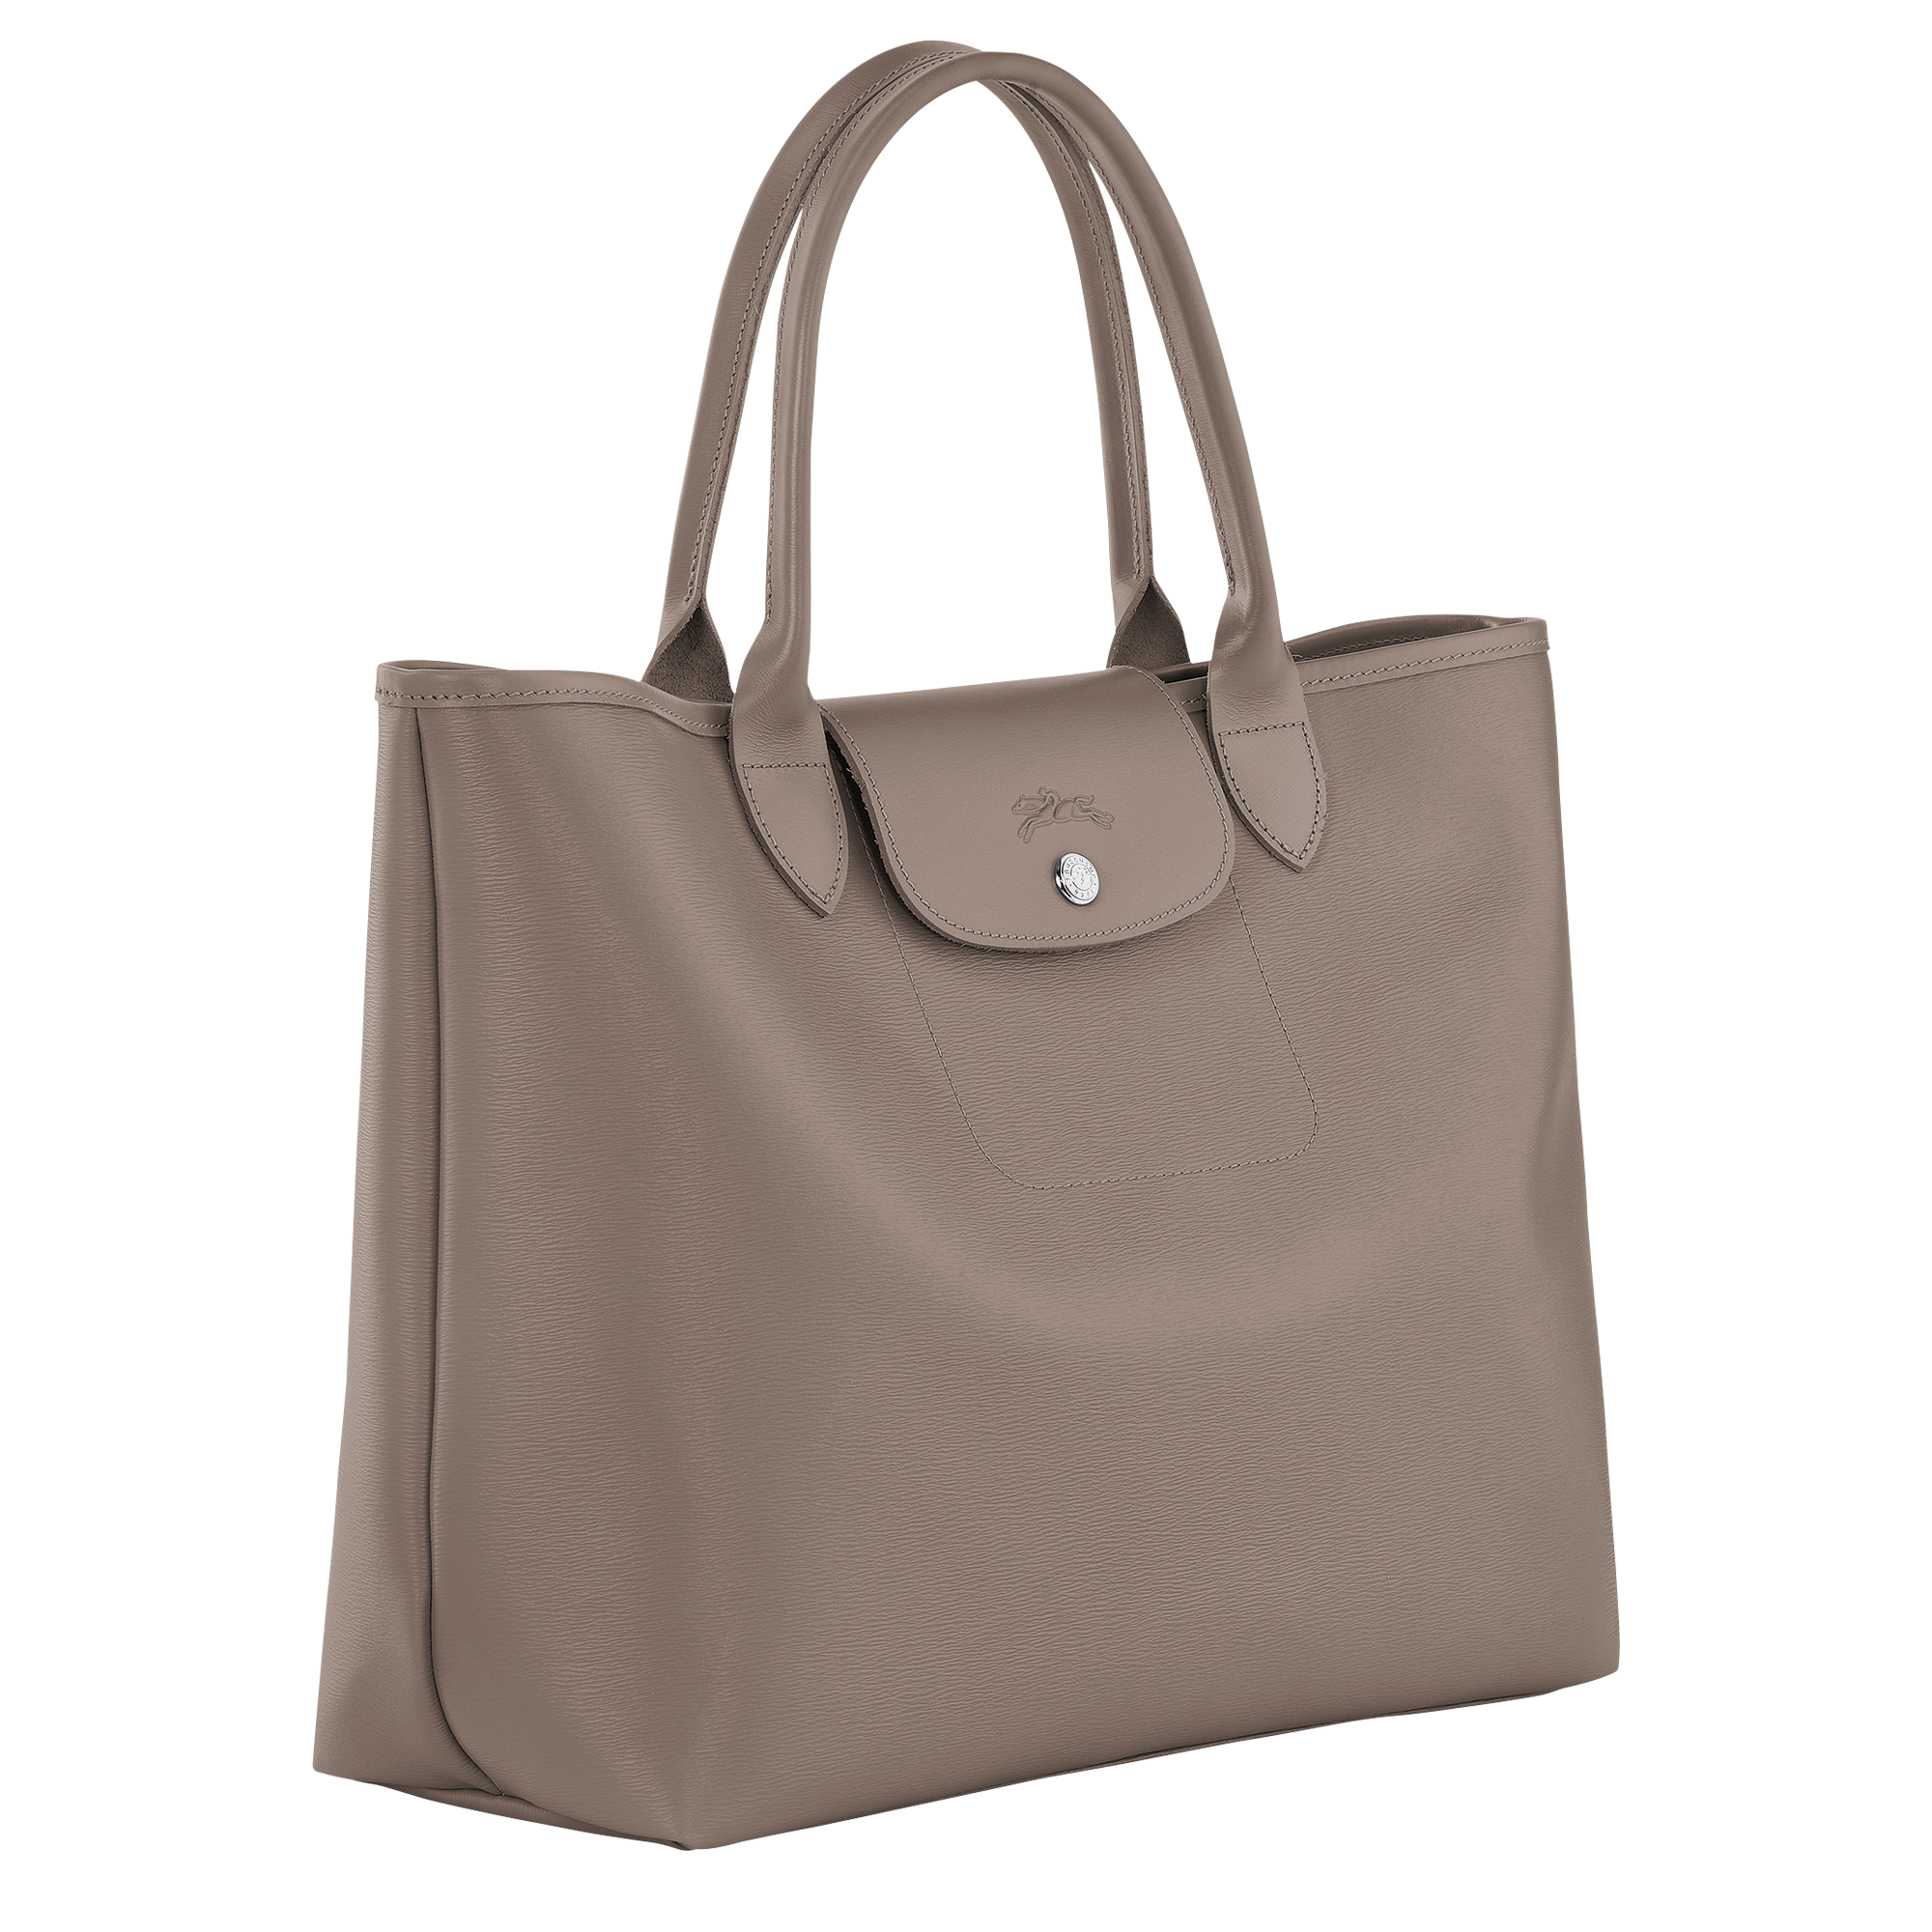 Longchamp LE PLIAGE CITY - Tote bag L in Taupe - 3 (SKU: 10182HYQ015)